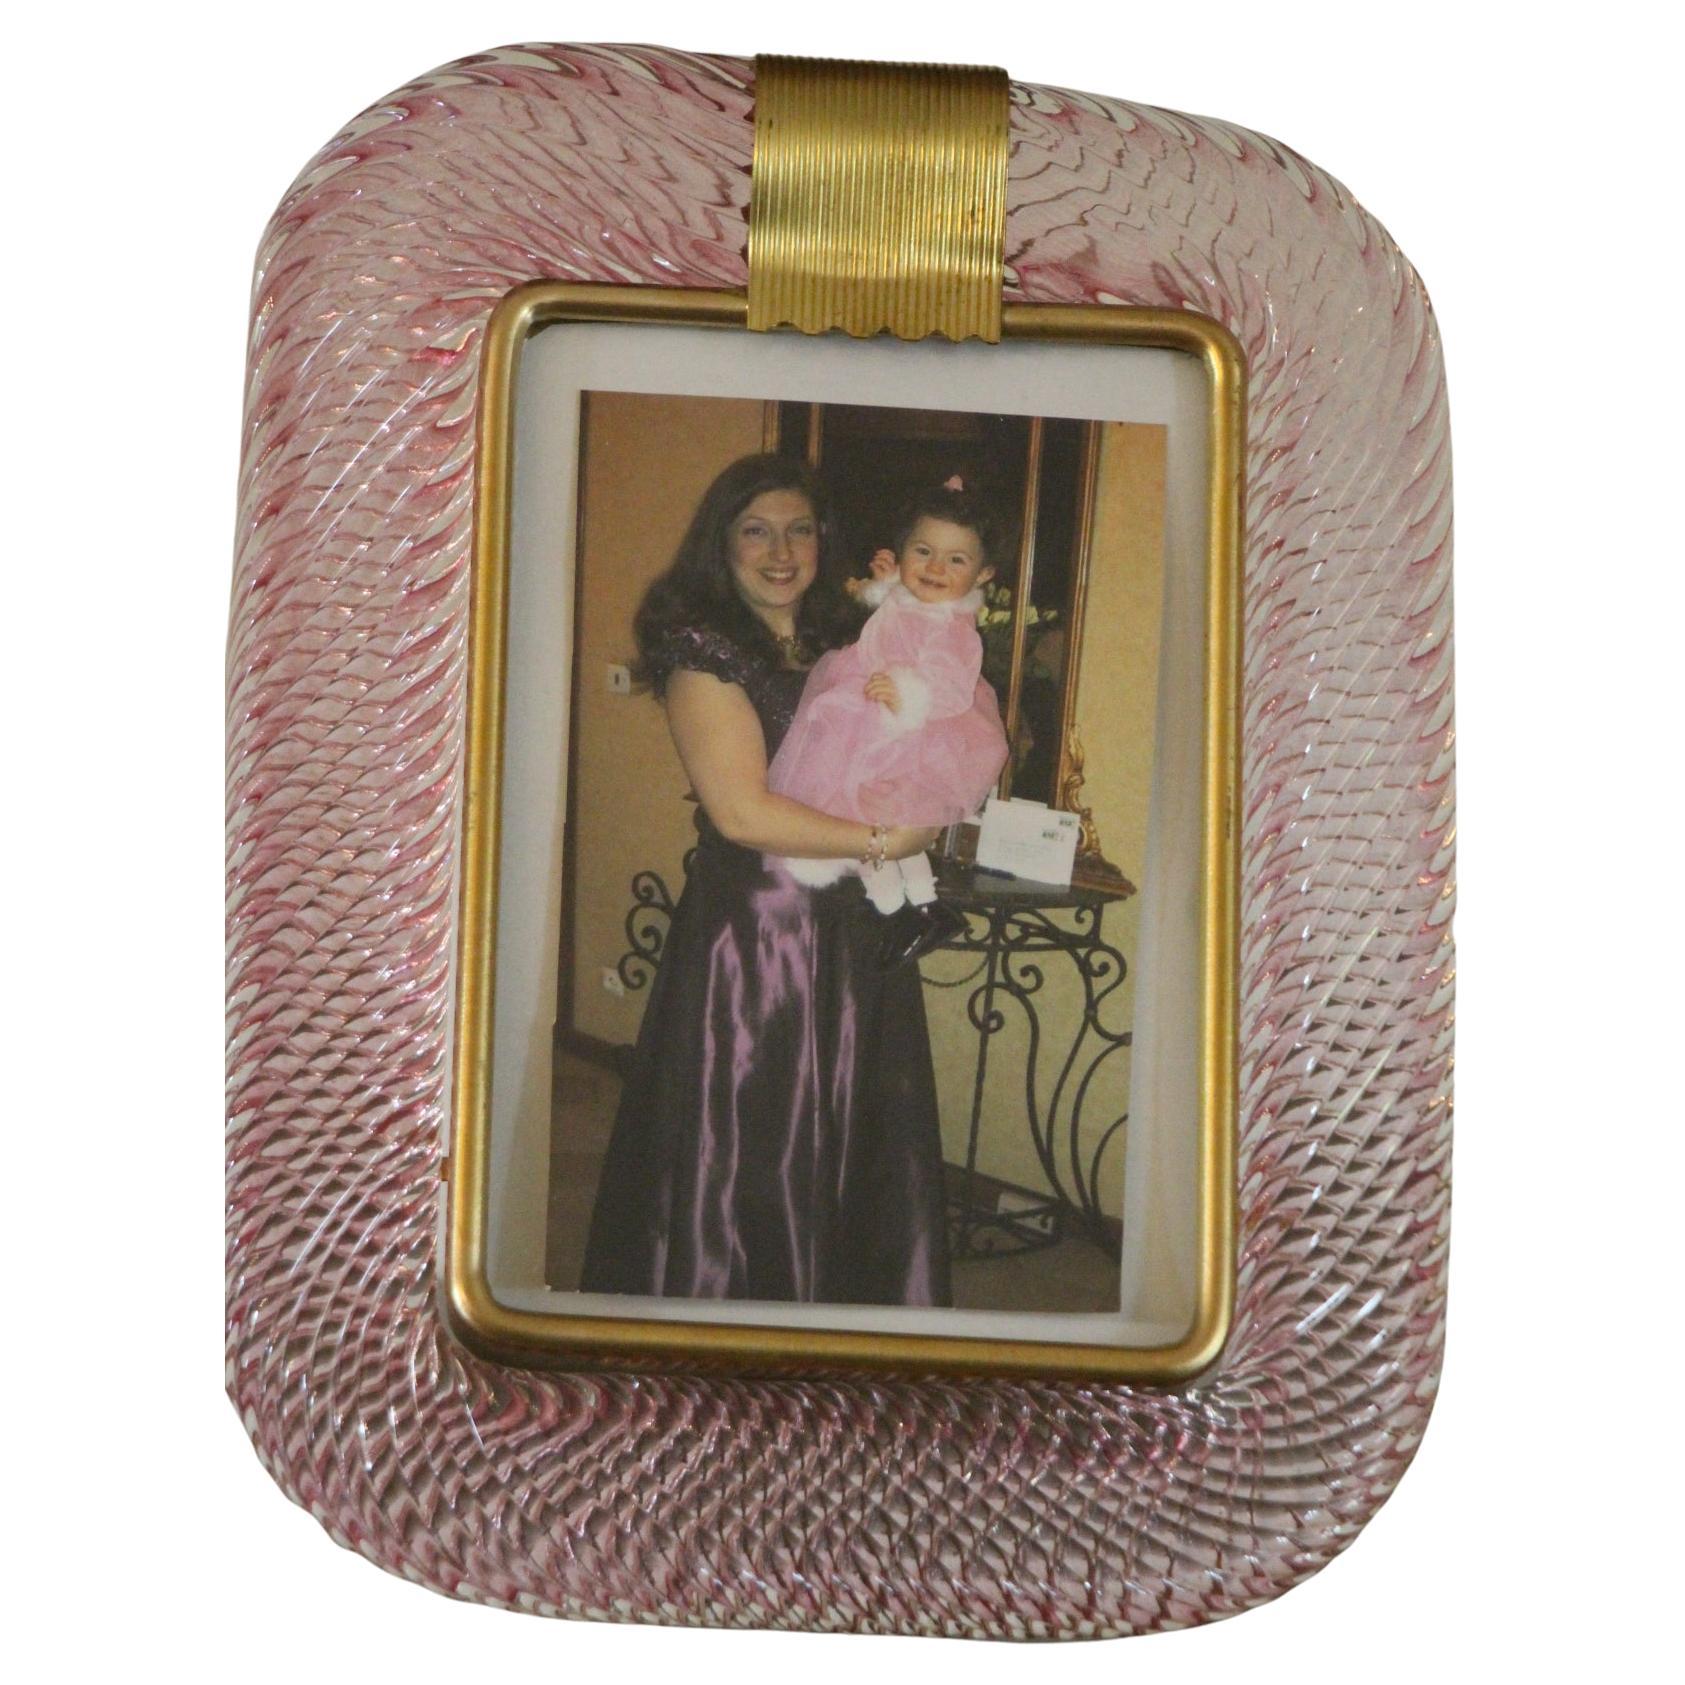 2000's Pink Twisted Murano Glass and Brass Photo Frame by Barovier e Toso